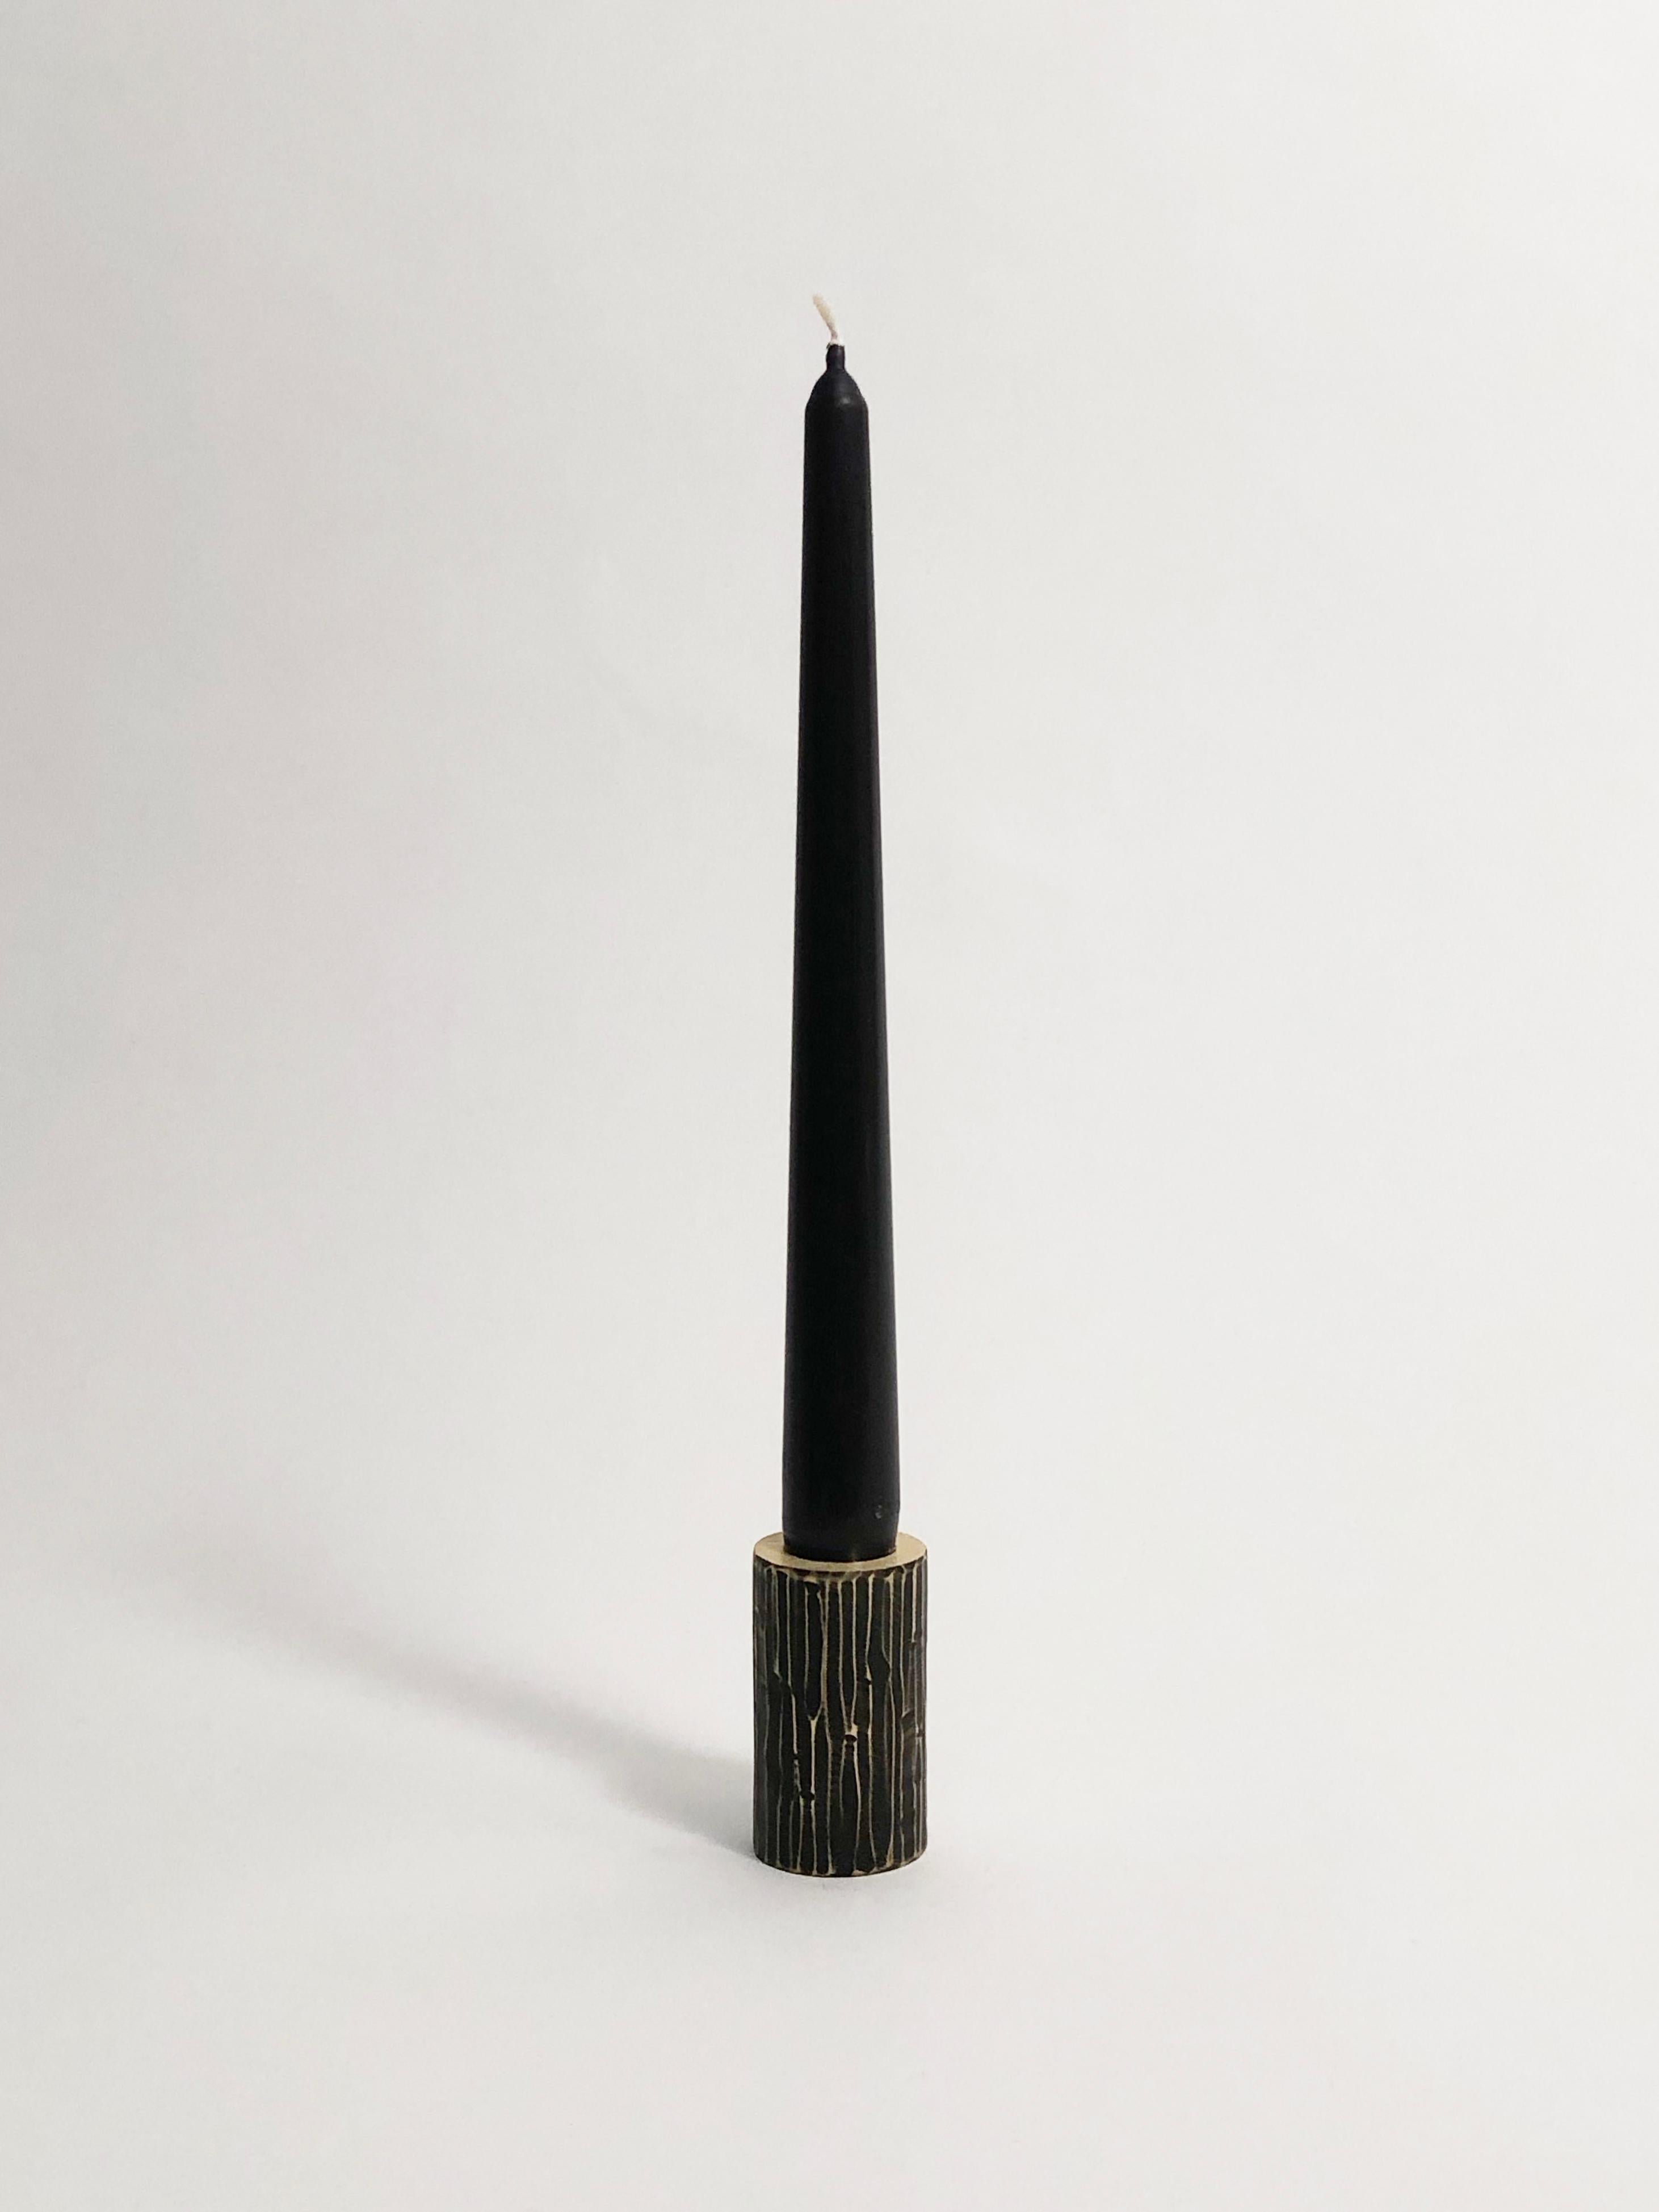 Solid brass sculpted candleholder by William Guillon
Signed William Guillon
Dimensions: Diameter 3.5 x height 6 cm
Also available: Diameter 4 x height 5 cm
Materials: Solid brass patinated black finish, with polished edge
Raw finish